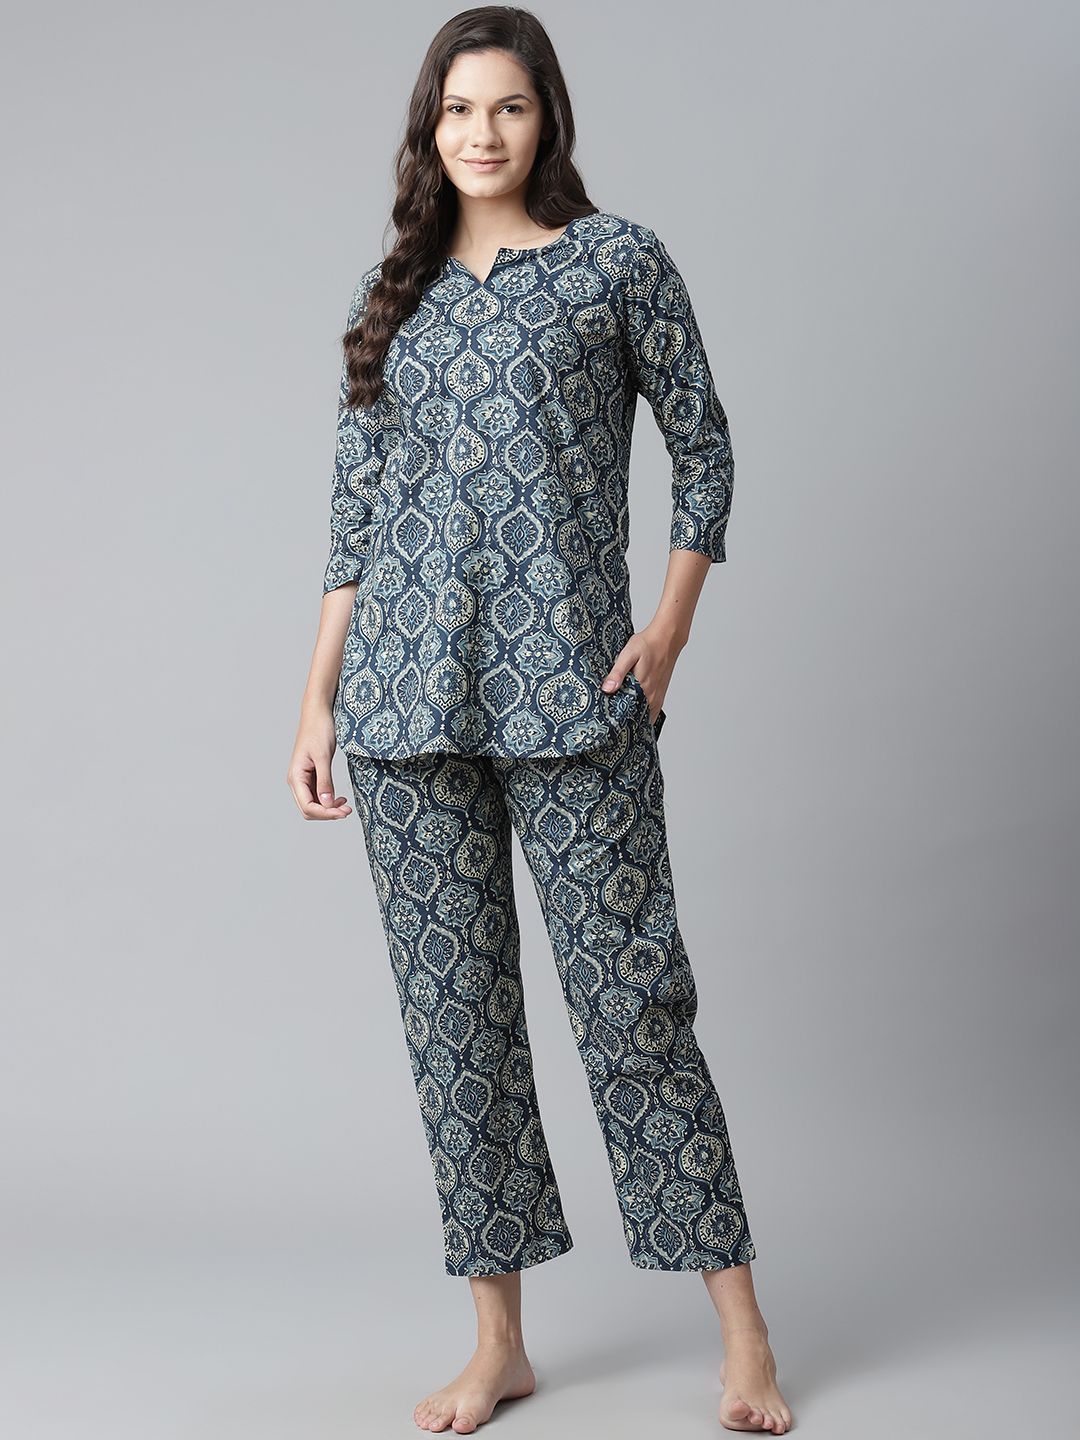 Divena Women Teal Blue & White Printed Cotton Night suit Price in India